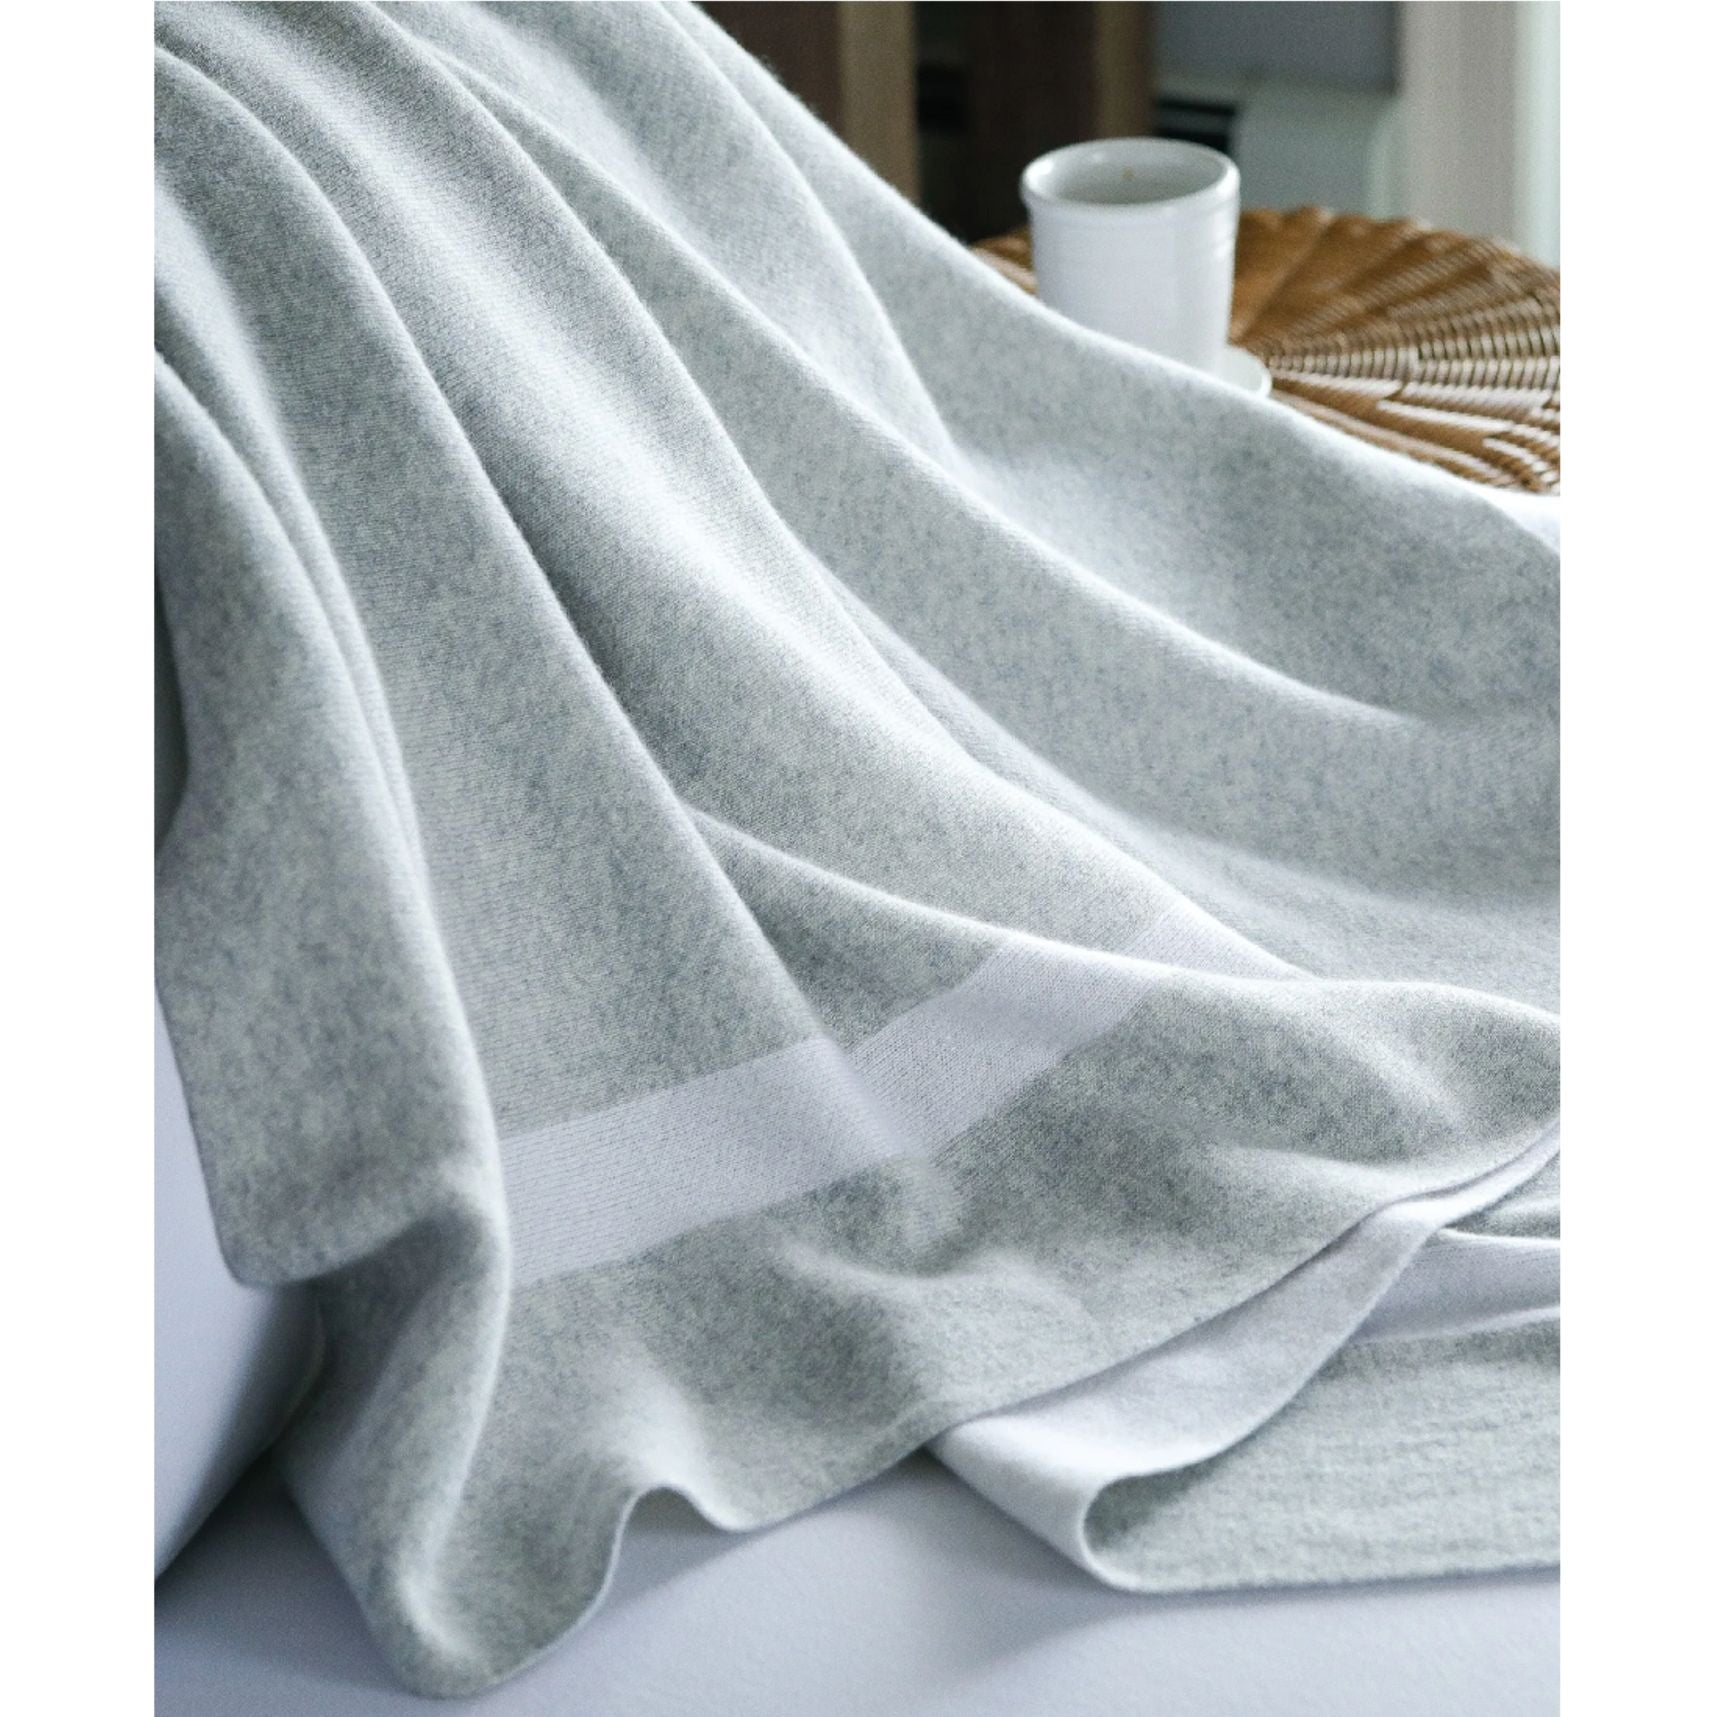 100% Cashmere Homestead Knit Throw (Choice of Colors) by Alashan Cashmere